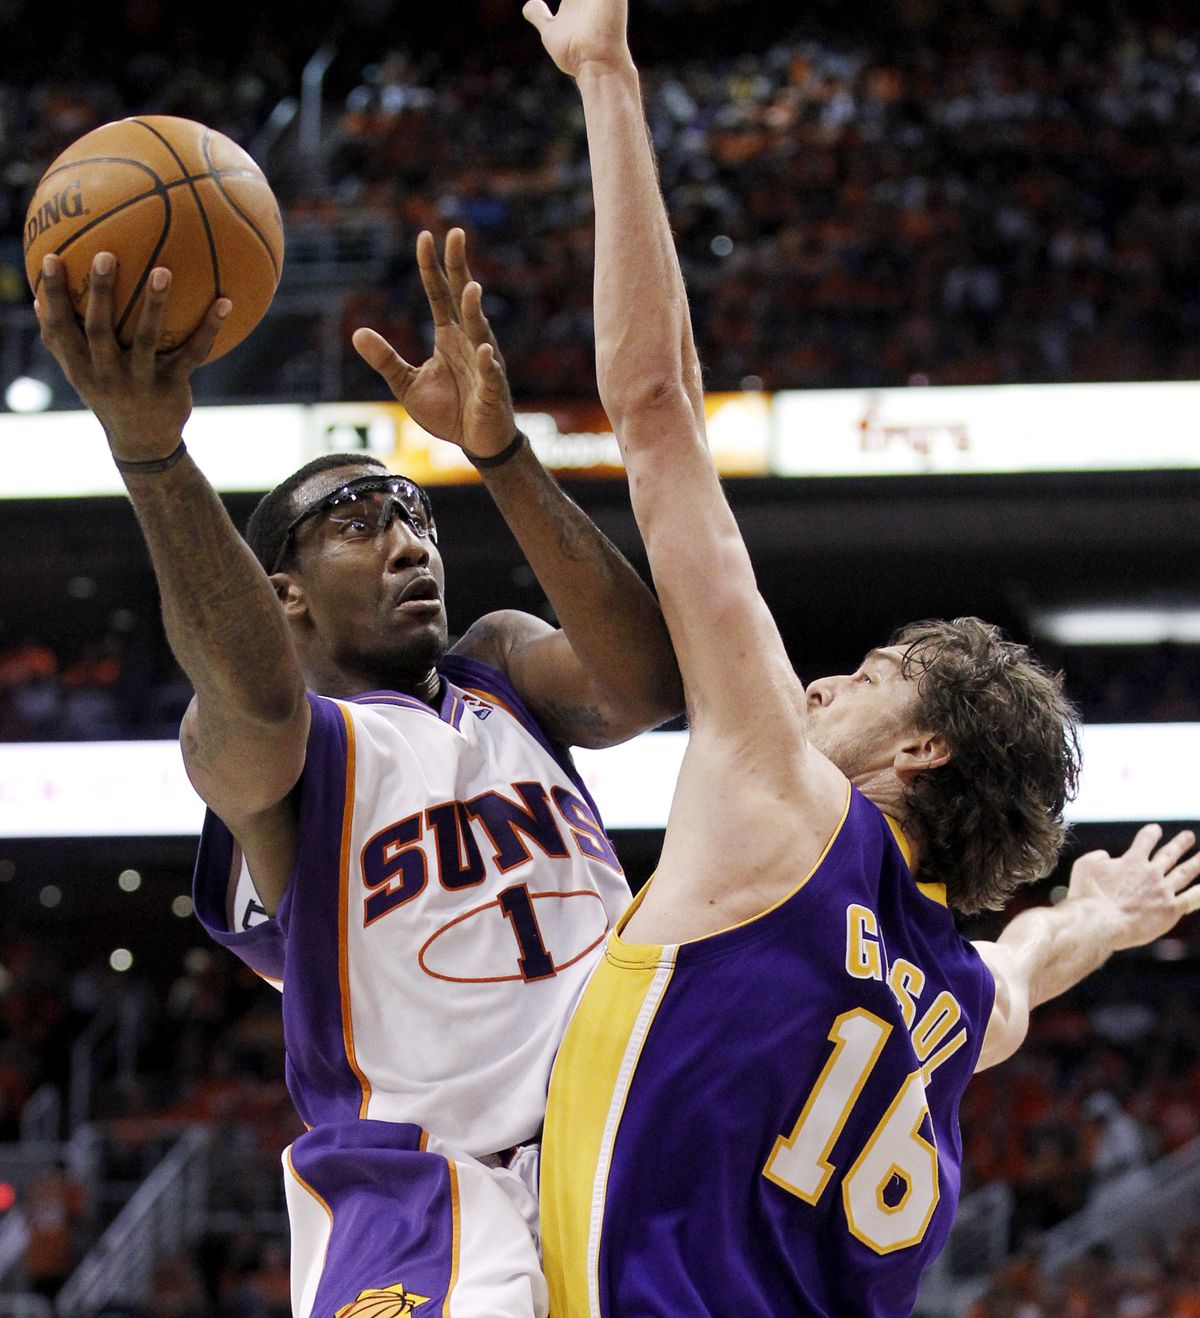 Amare Stoudemire matched his career playoff high with 42 points. (Associated Press)